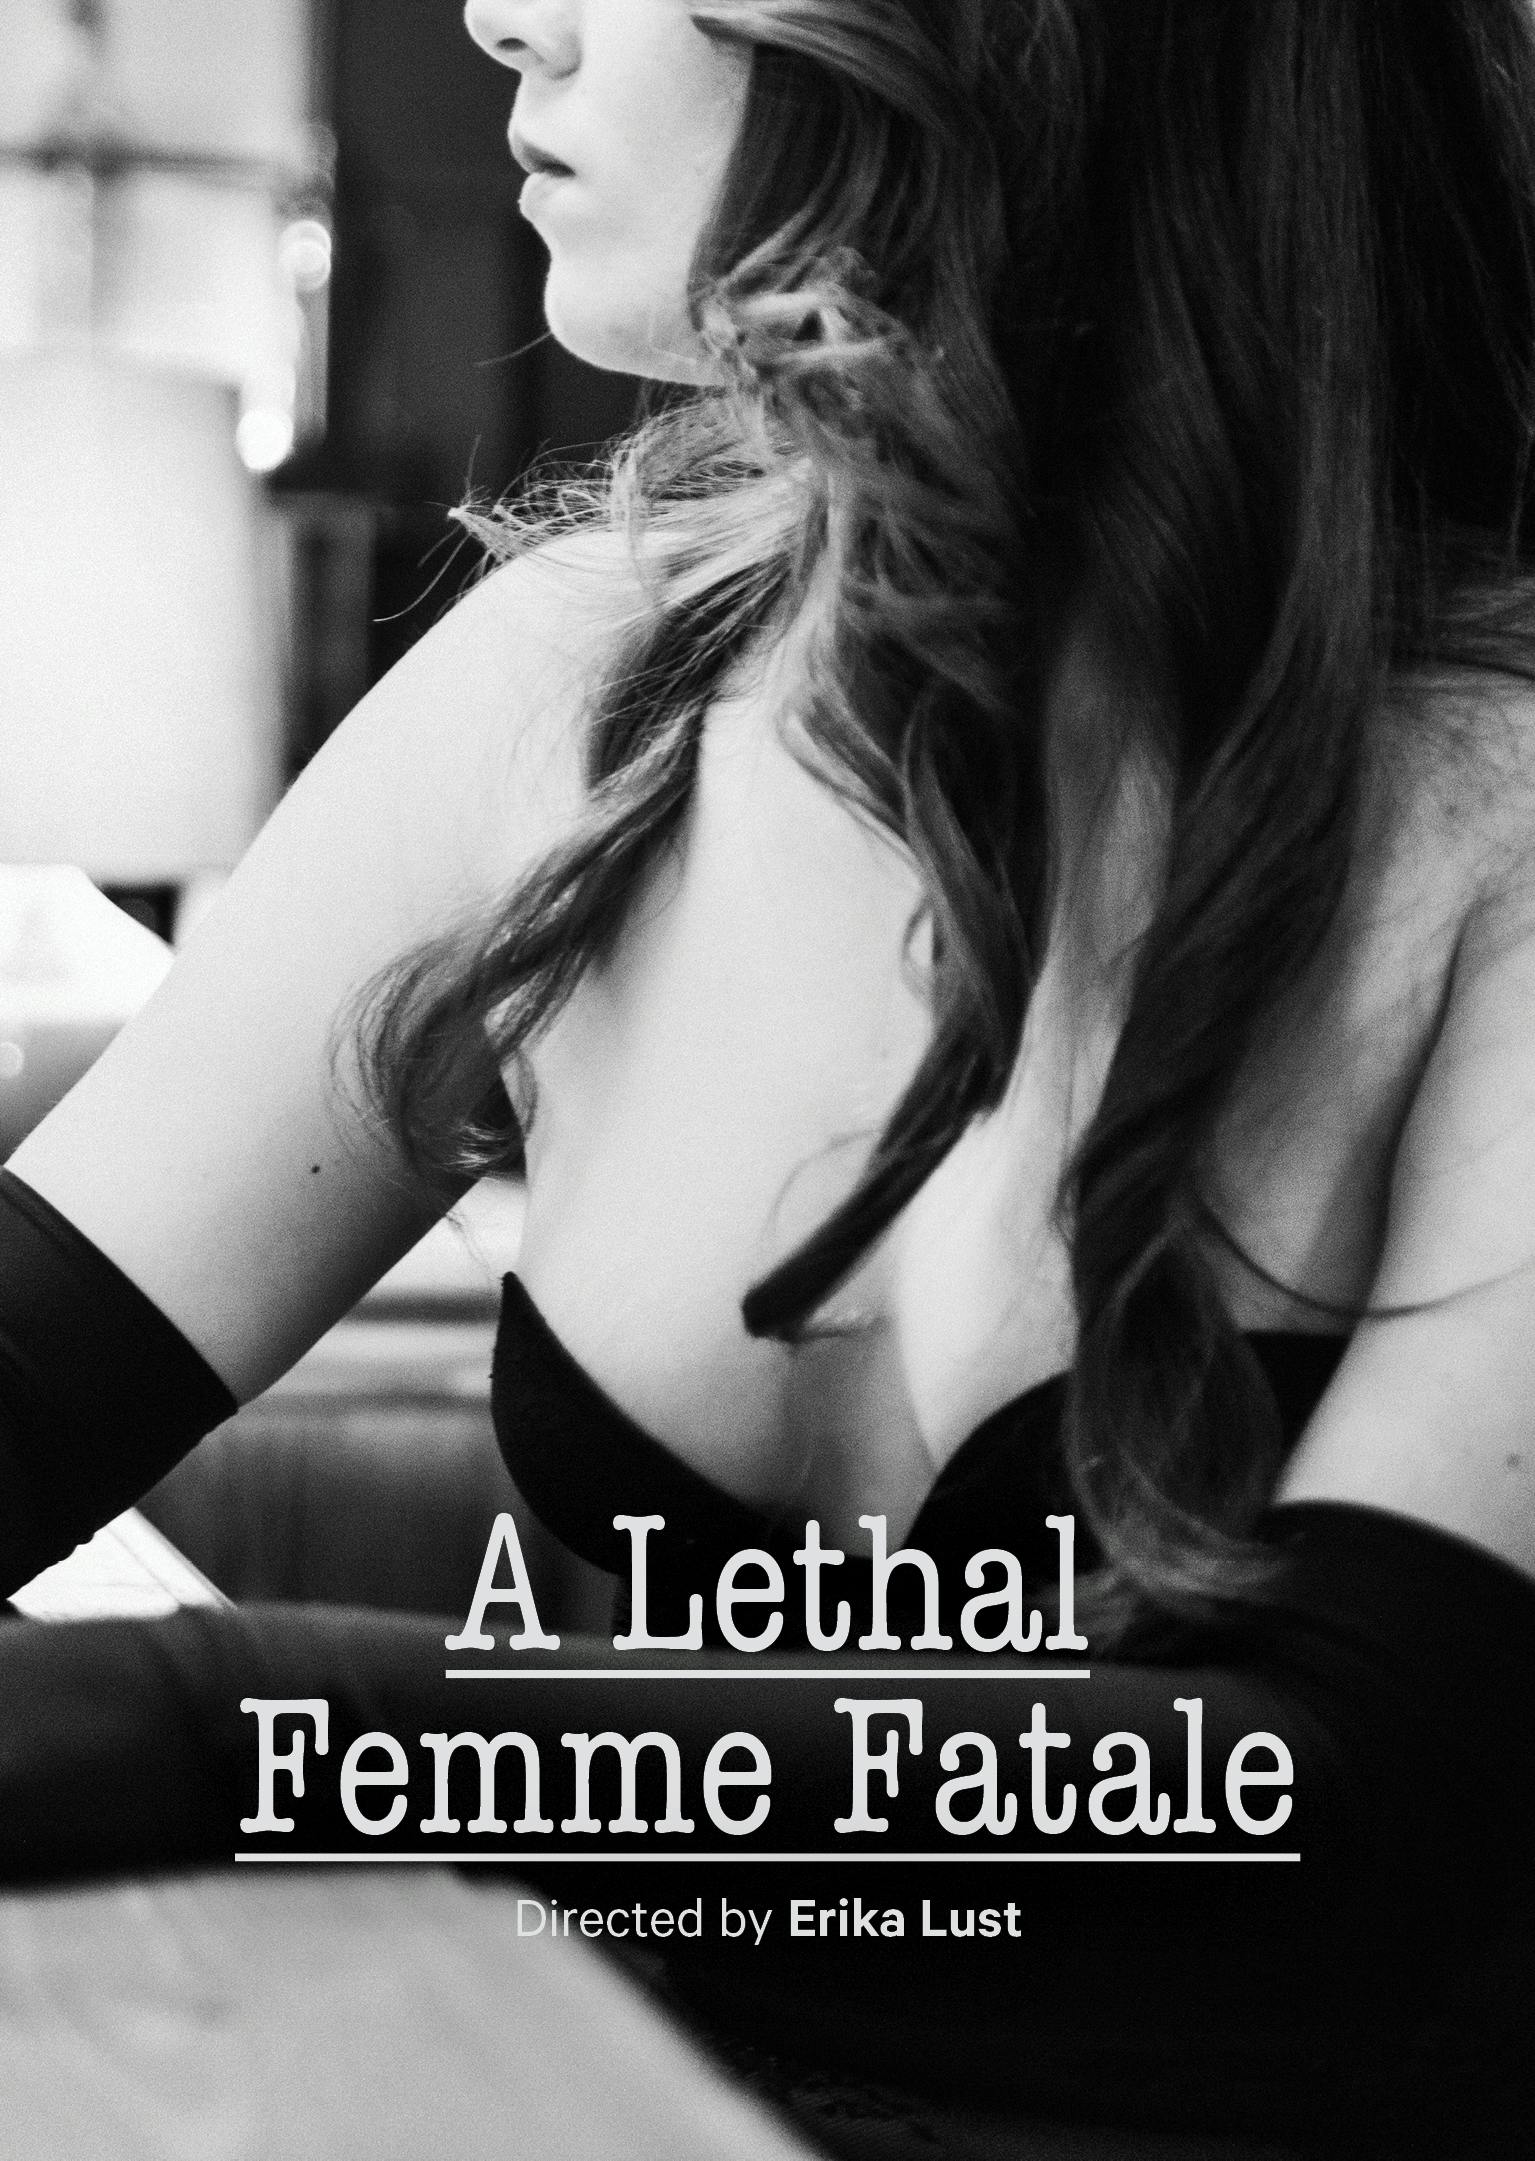 A Lethal Femme Fatale by Erika Lust 